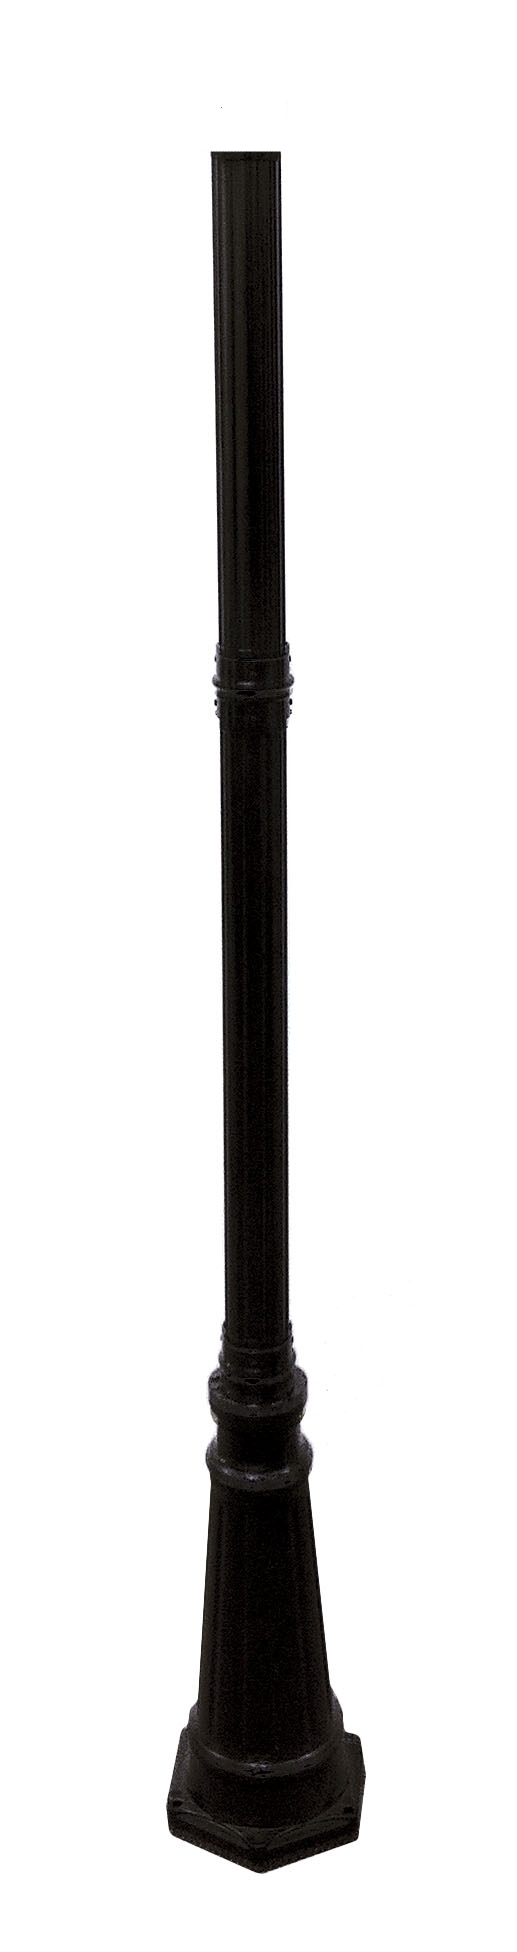 6.5-Foot Imperial Black Decorative Post with 3-Inch Fitter